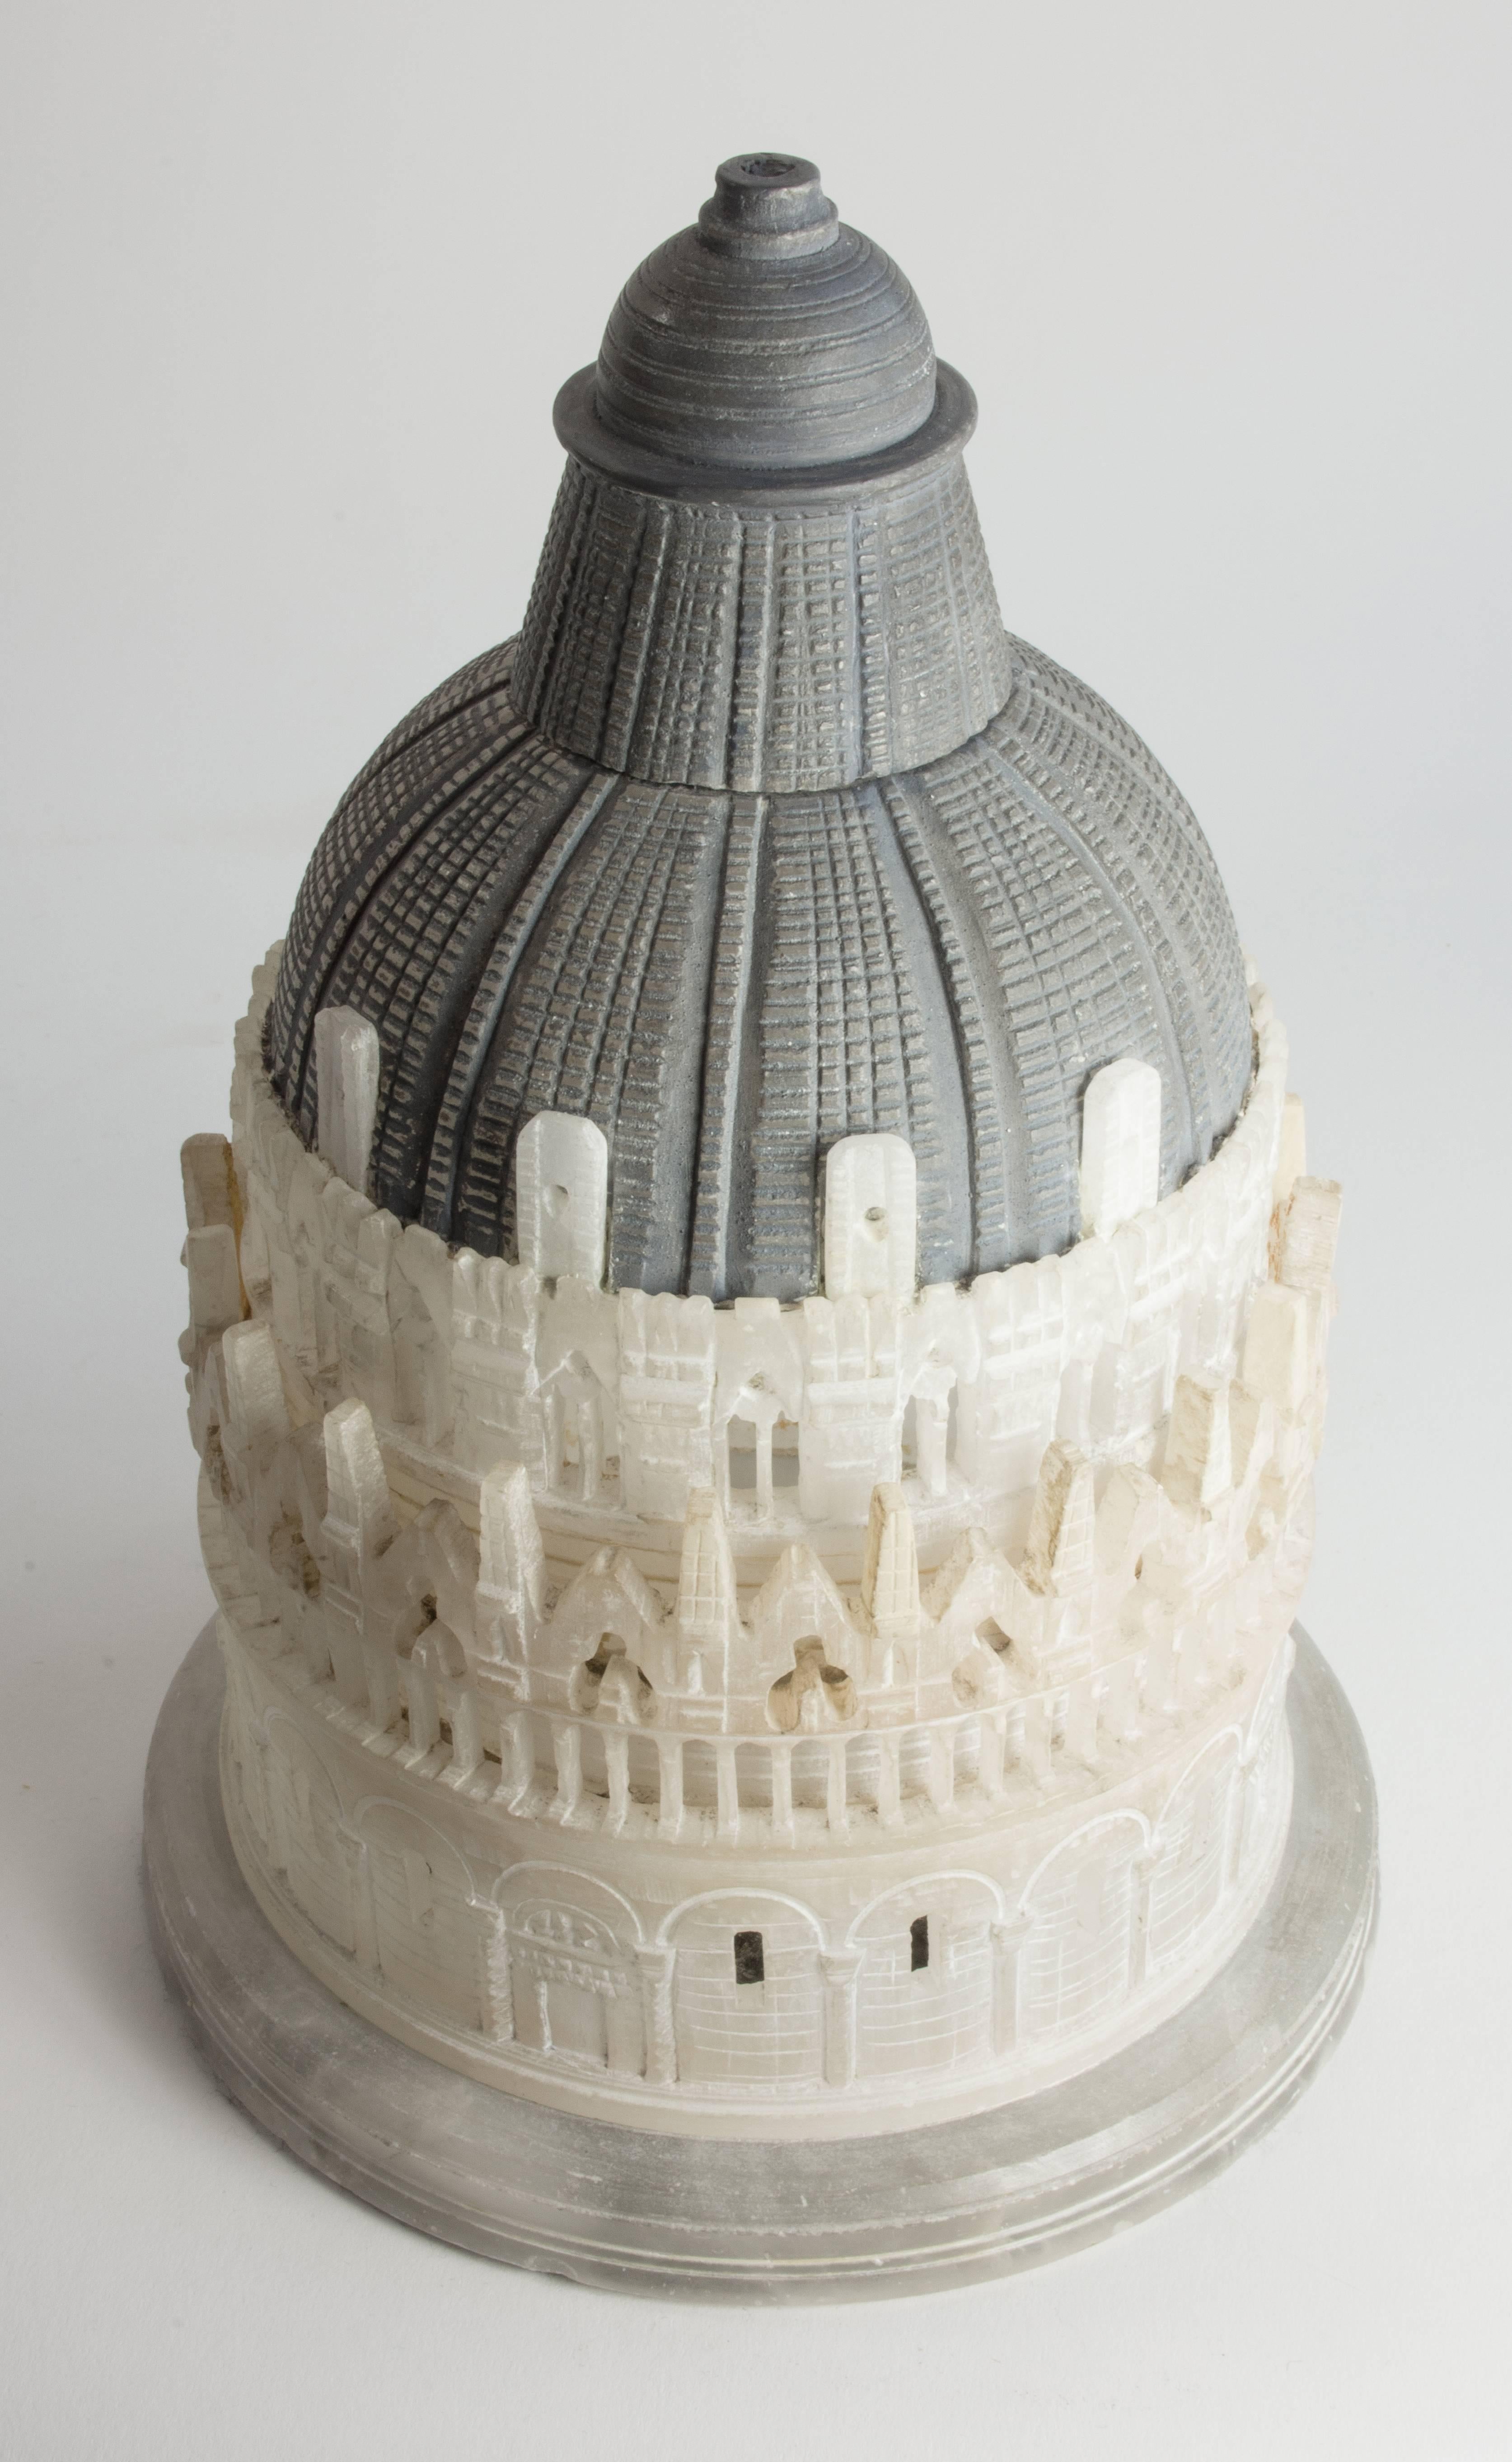 St. John’s Baptistry, Pisa
Alabaster, 10.5” H.
Pisa, circa 1880.

With the city of Pisa, in Italy’s northwest, Ligurian coast, our thoughts run to the Tower. In architectural history, never has imperfection provided such celebrity. There are, of